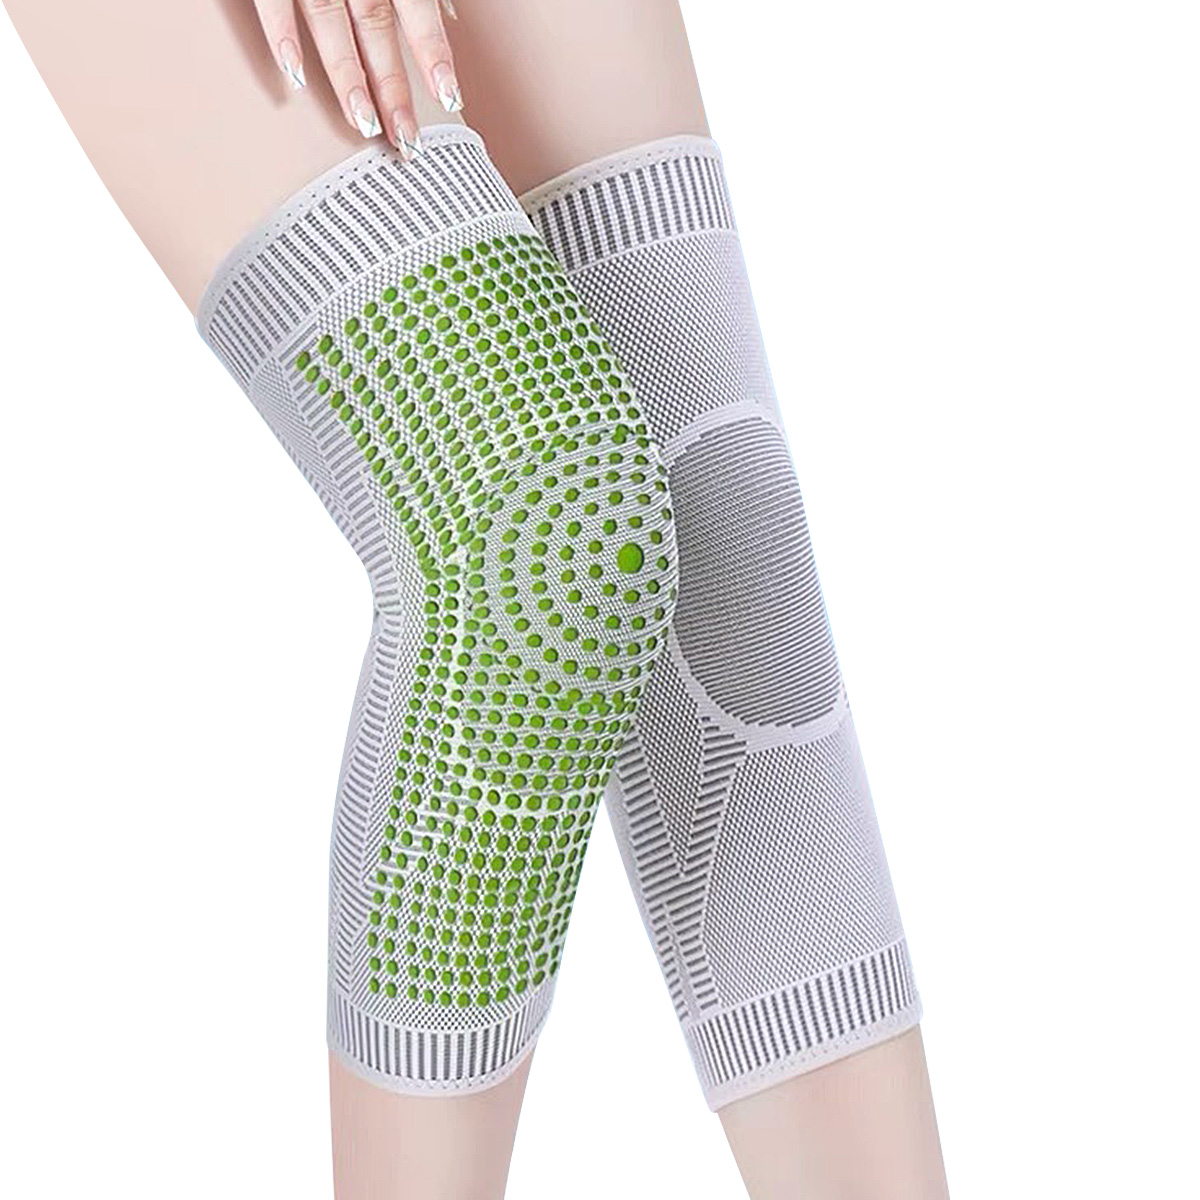 Hot New Products Knee Wrap - Knitting Warm Compression Medical Knee Support  – Senyu